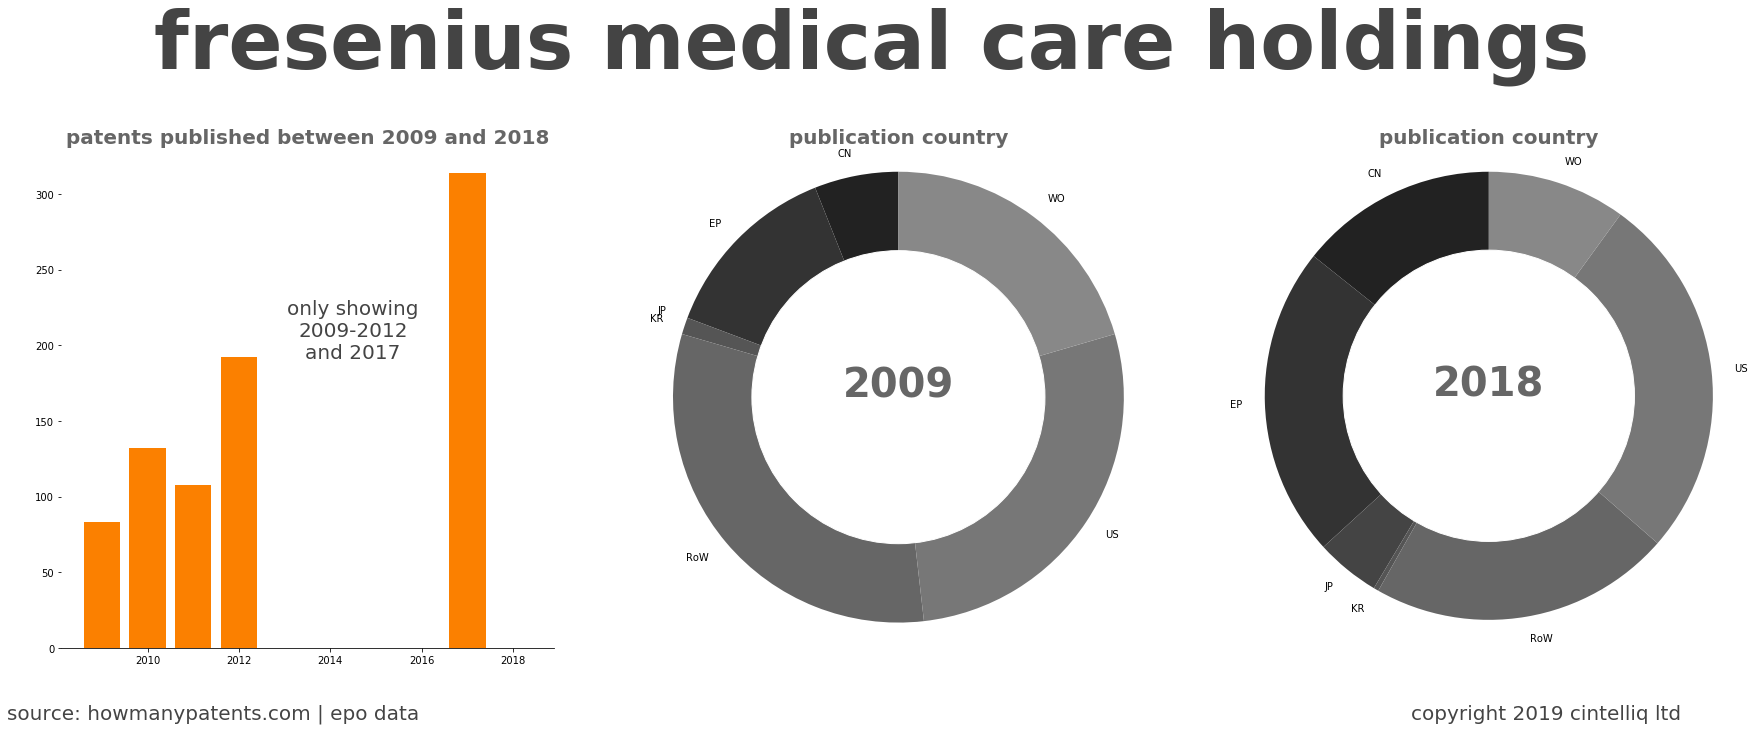 summary of patents for Fresenius Medical Care Holdings